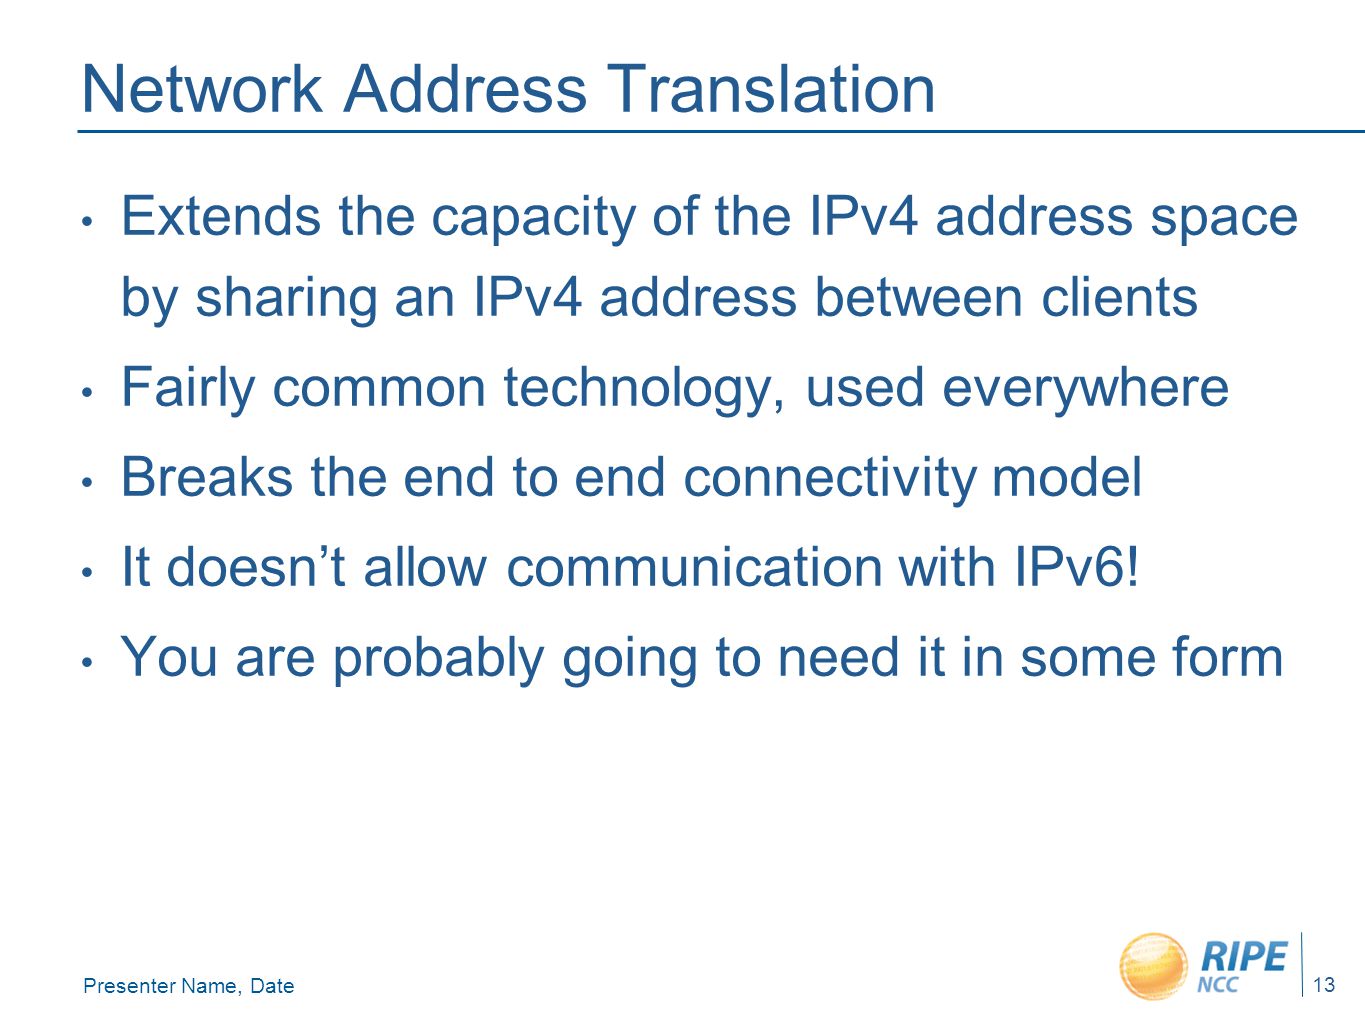 Presenter Name, Date 13 Network Address Translation Extends the capacity of the IPv4 address space by sharing an IPv4 address between clients Fairly common technology, used everywhere Breaks the end to end connectivity model It doesn’t allow communication with IPv6.